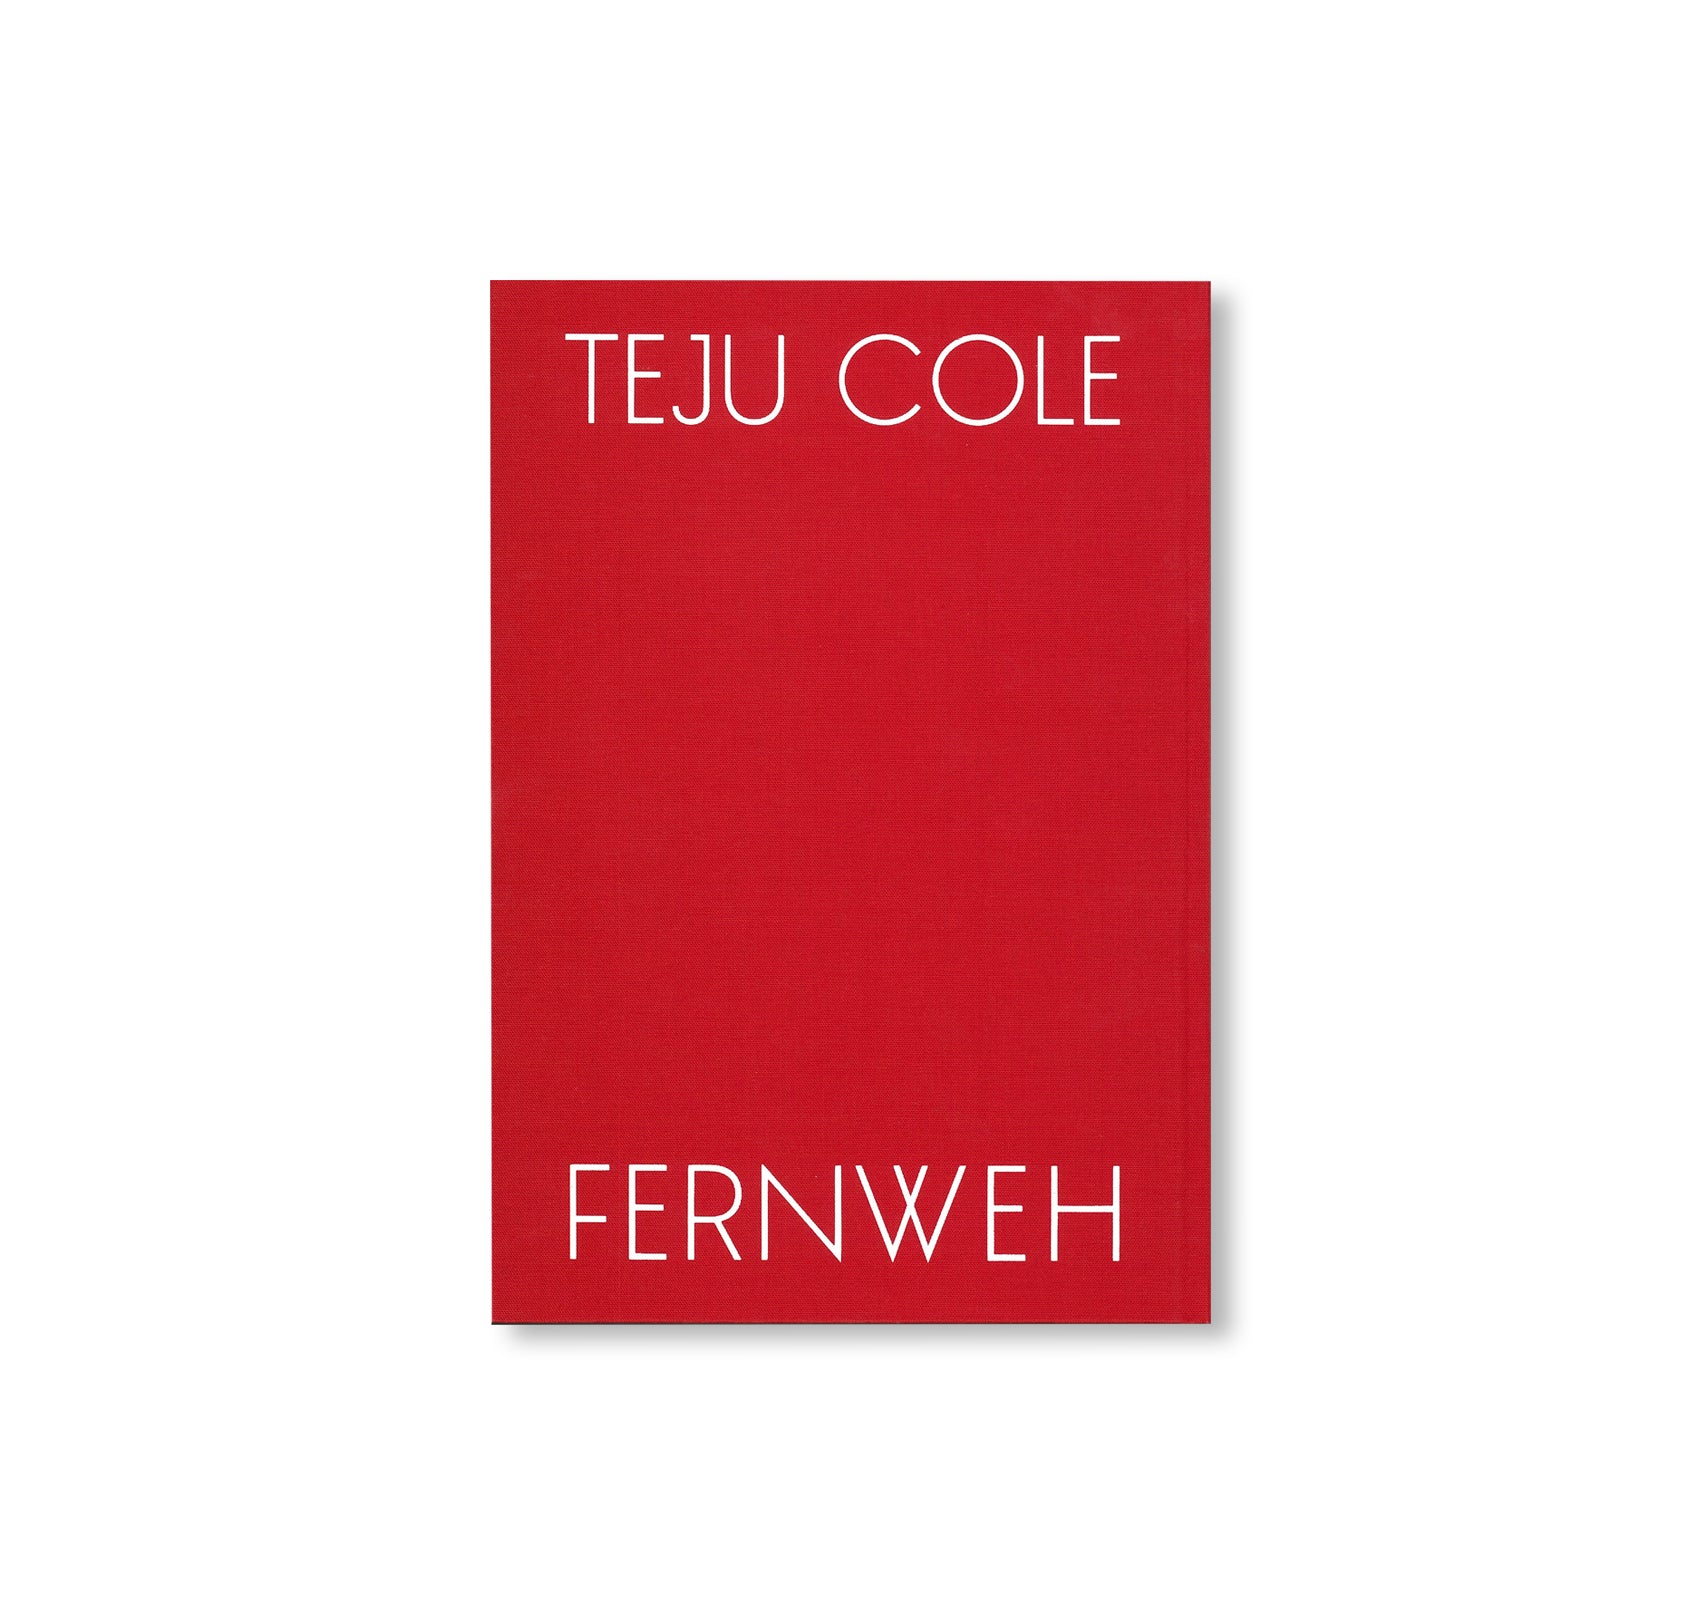 FERNWEH by Teju Cole [SIGNED]